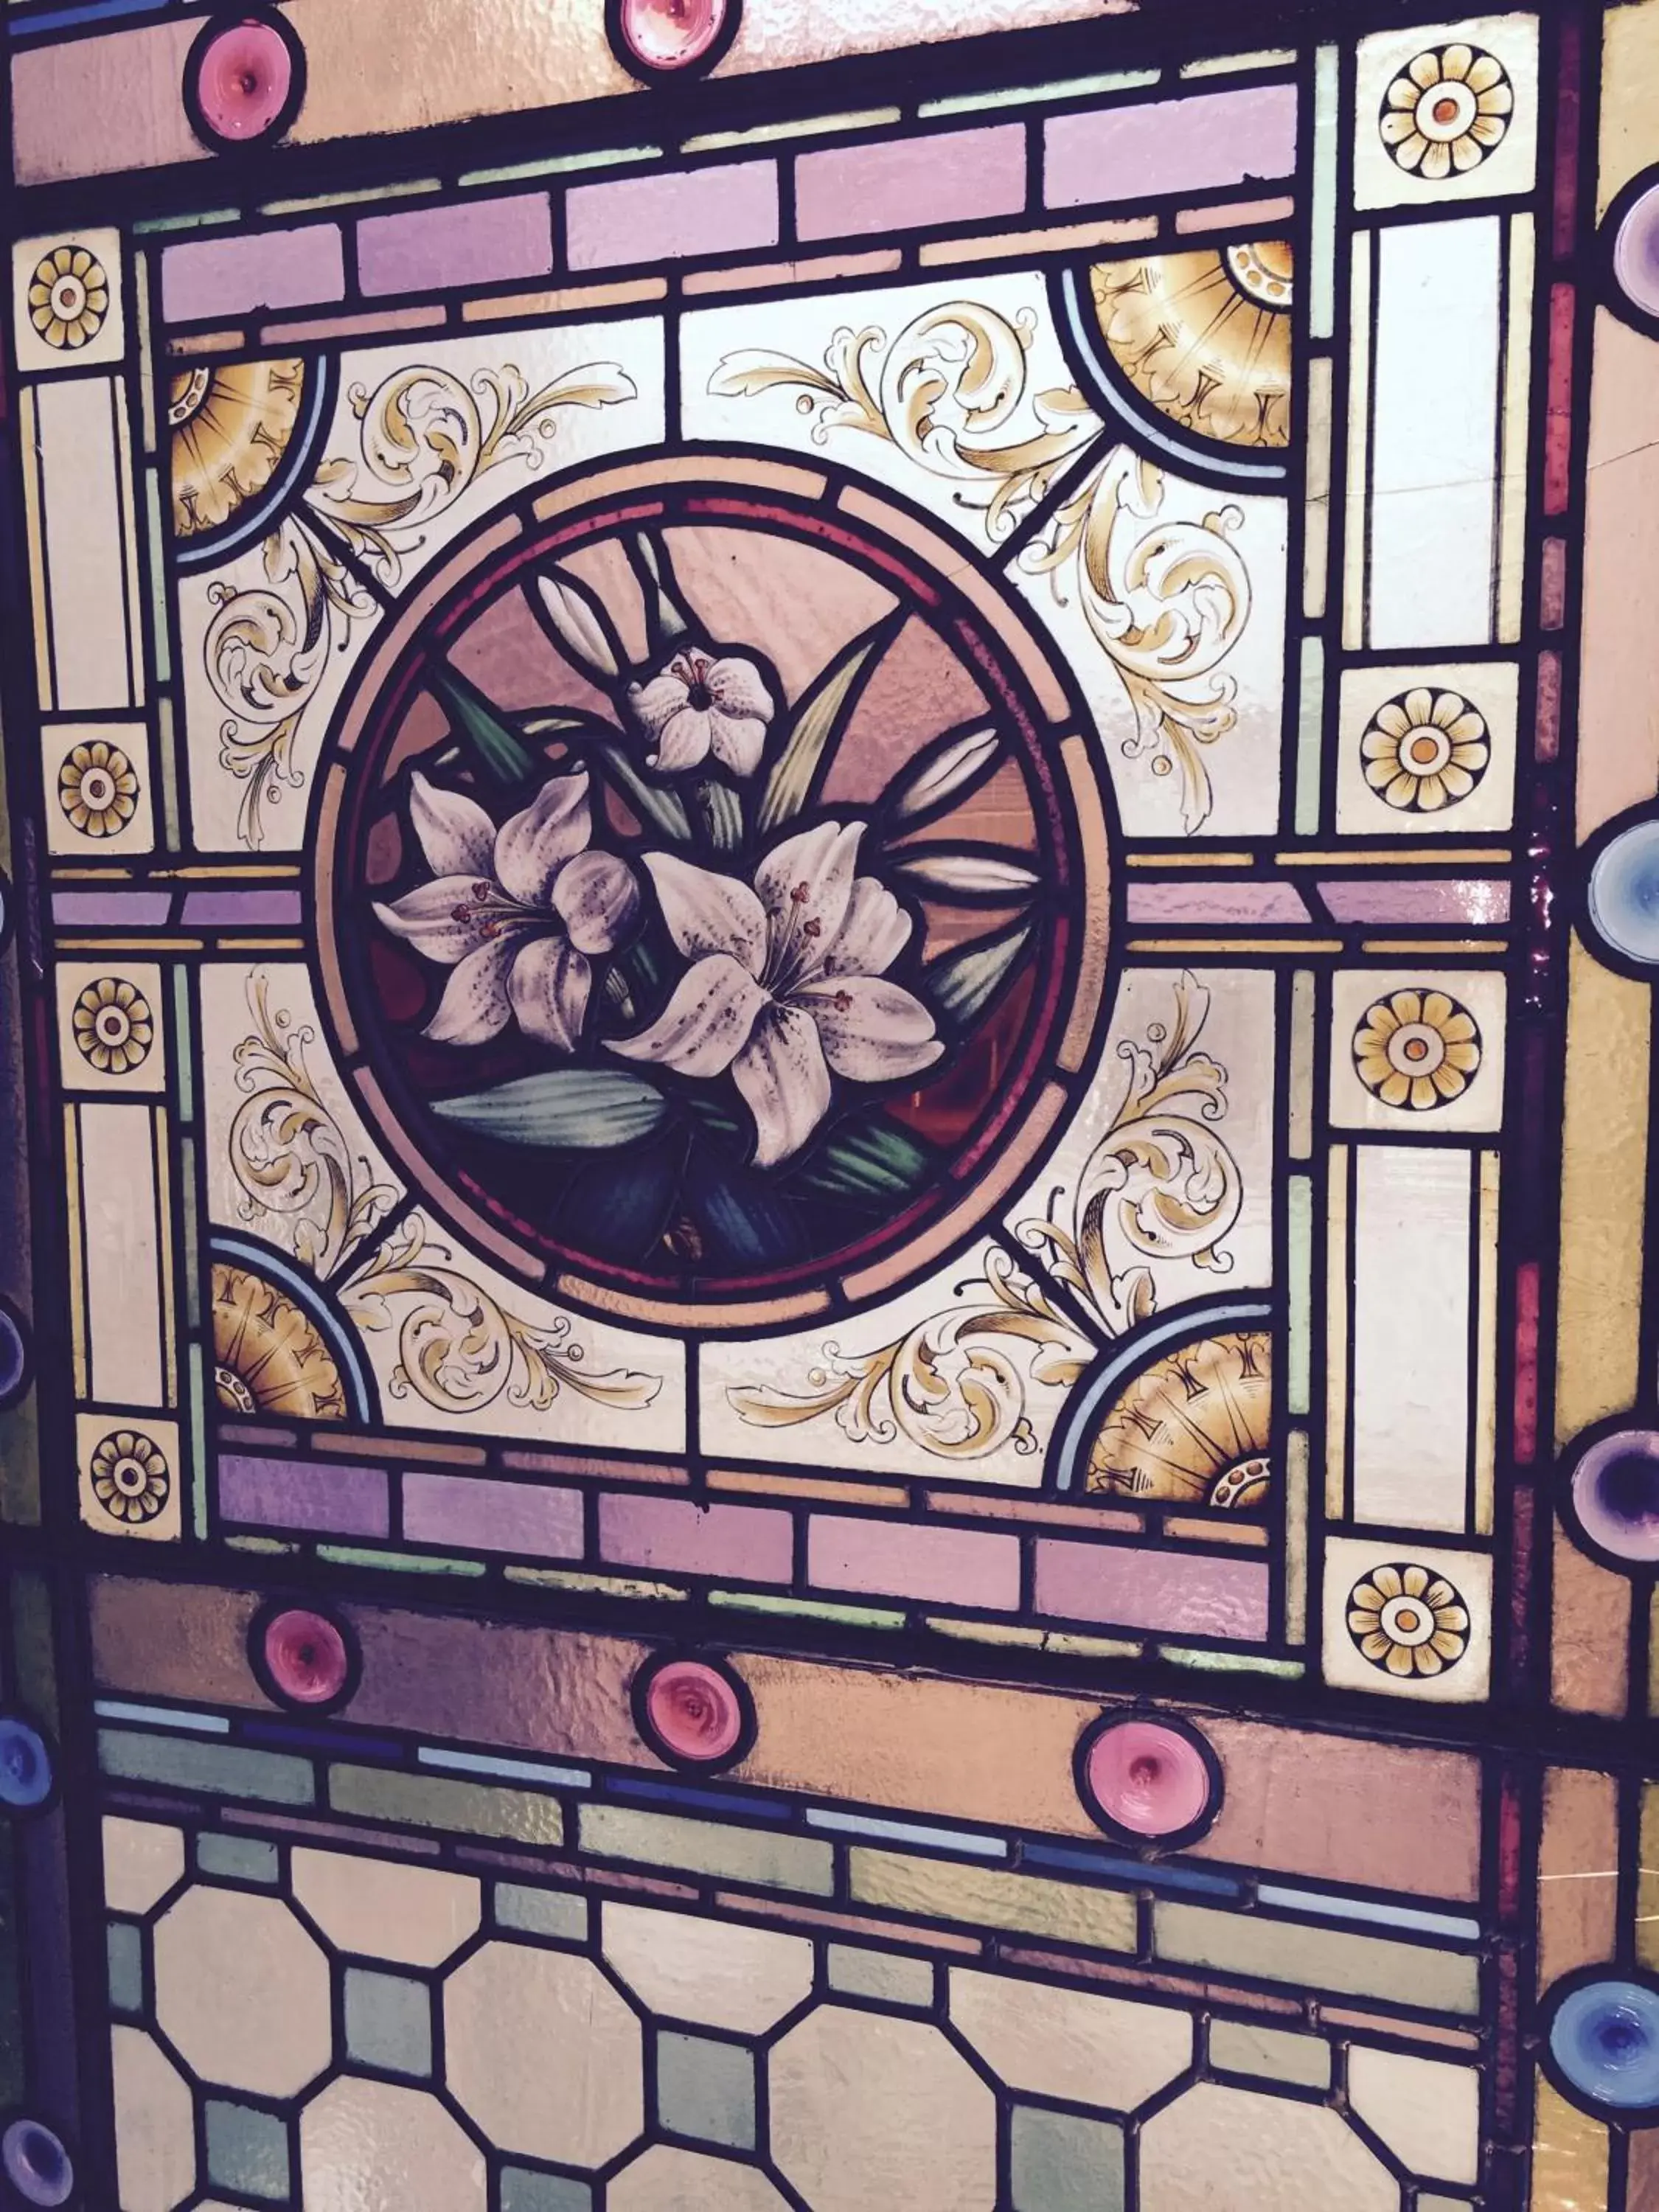 Decorative detail in The Station Hotel